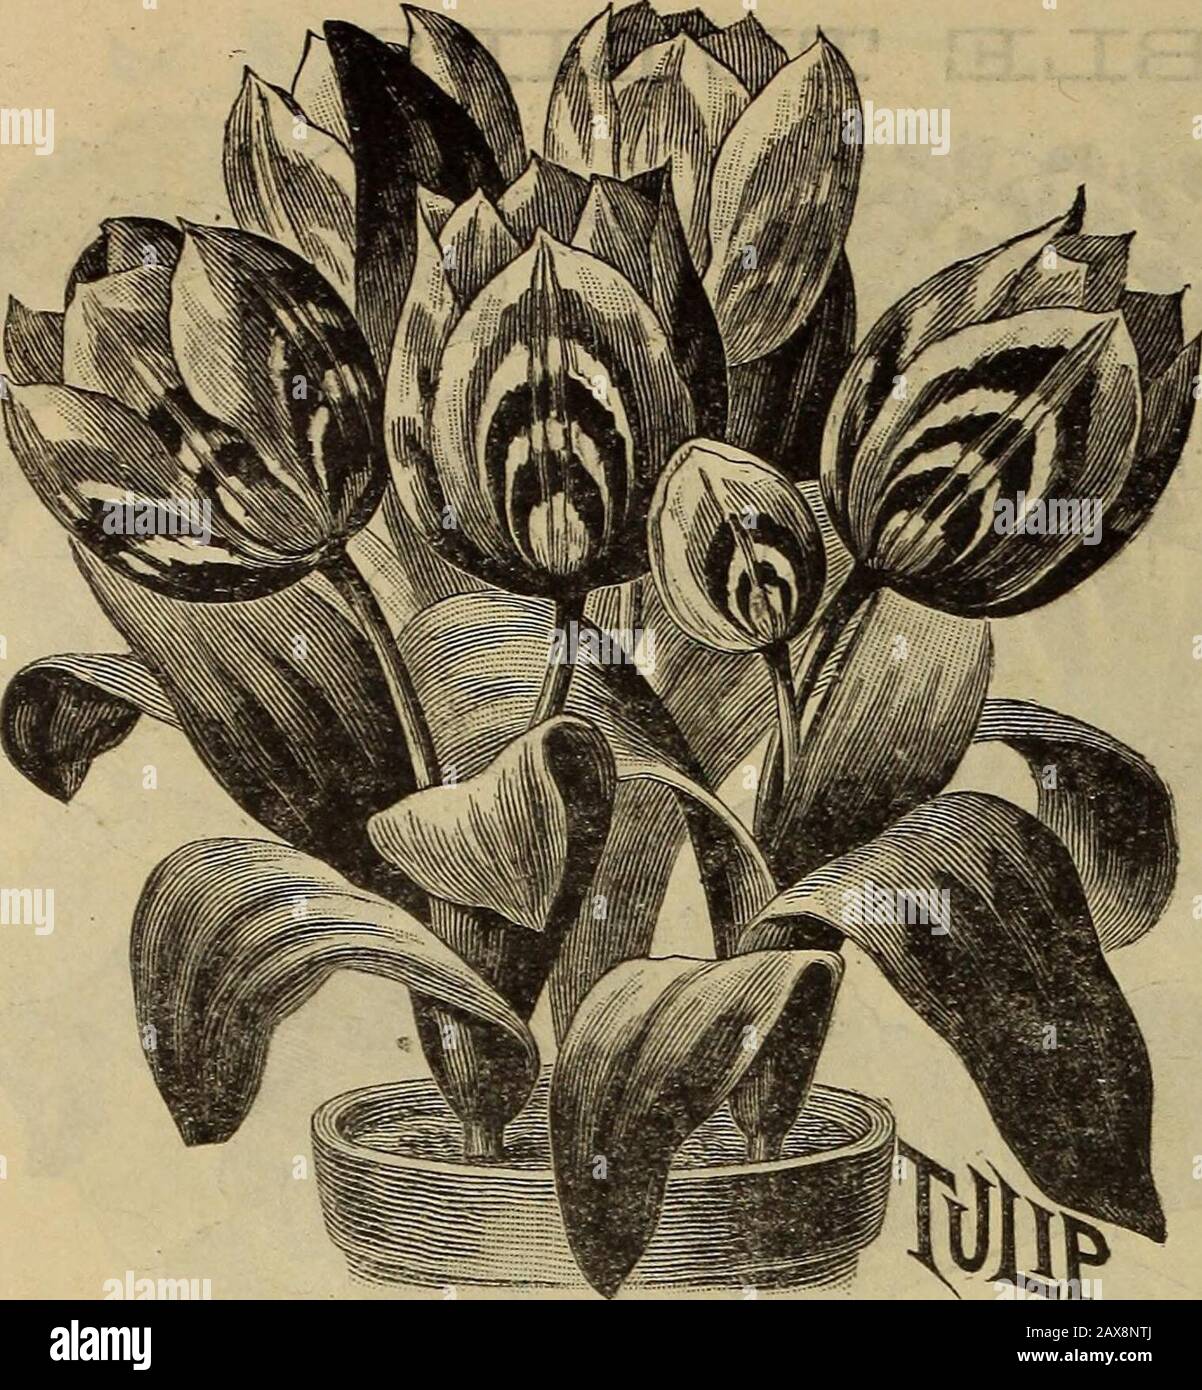 Childs' catalogue of fall bulbs that bloom plants, seeds, shrubs, fruits etcwith a treatise on the culture of bulbs indoors and out. . nd most perfect form. Deep, yellow. Price, 3c. each ; the 10 for 25c; or 30c, dozen;$1.75 per 100 TEN EXTRA FINE DOUBLE EARLYTULIPS. Double Crown—Large and double flower. Darkcardinal-red, with black shading. One ofthe best. Dnke of York—Beautiful incurved flowers of poppv-red, broadly edged white.Glorin Solus — Of enormous size and very double. Bright scarlet, edged yellow.La Candenr-Large and double; wax-like pure whitp. Largely used for cemetery planting.Laf Stock Photo